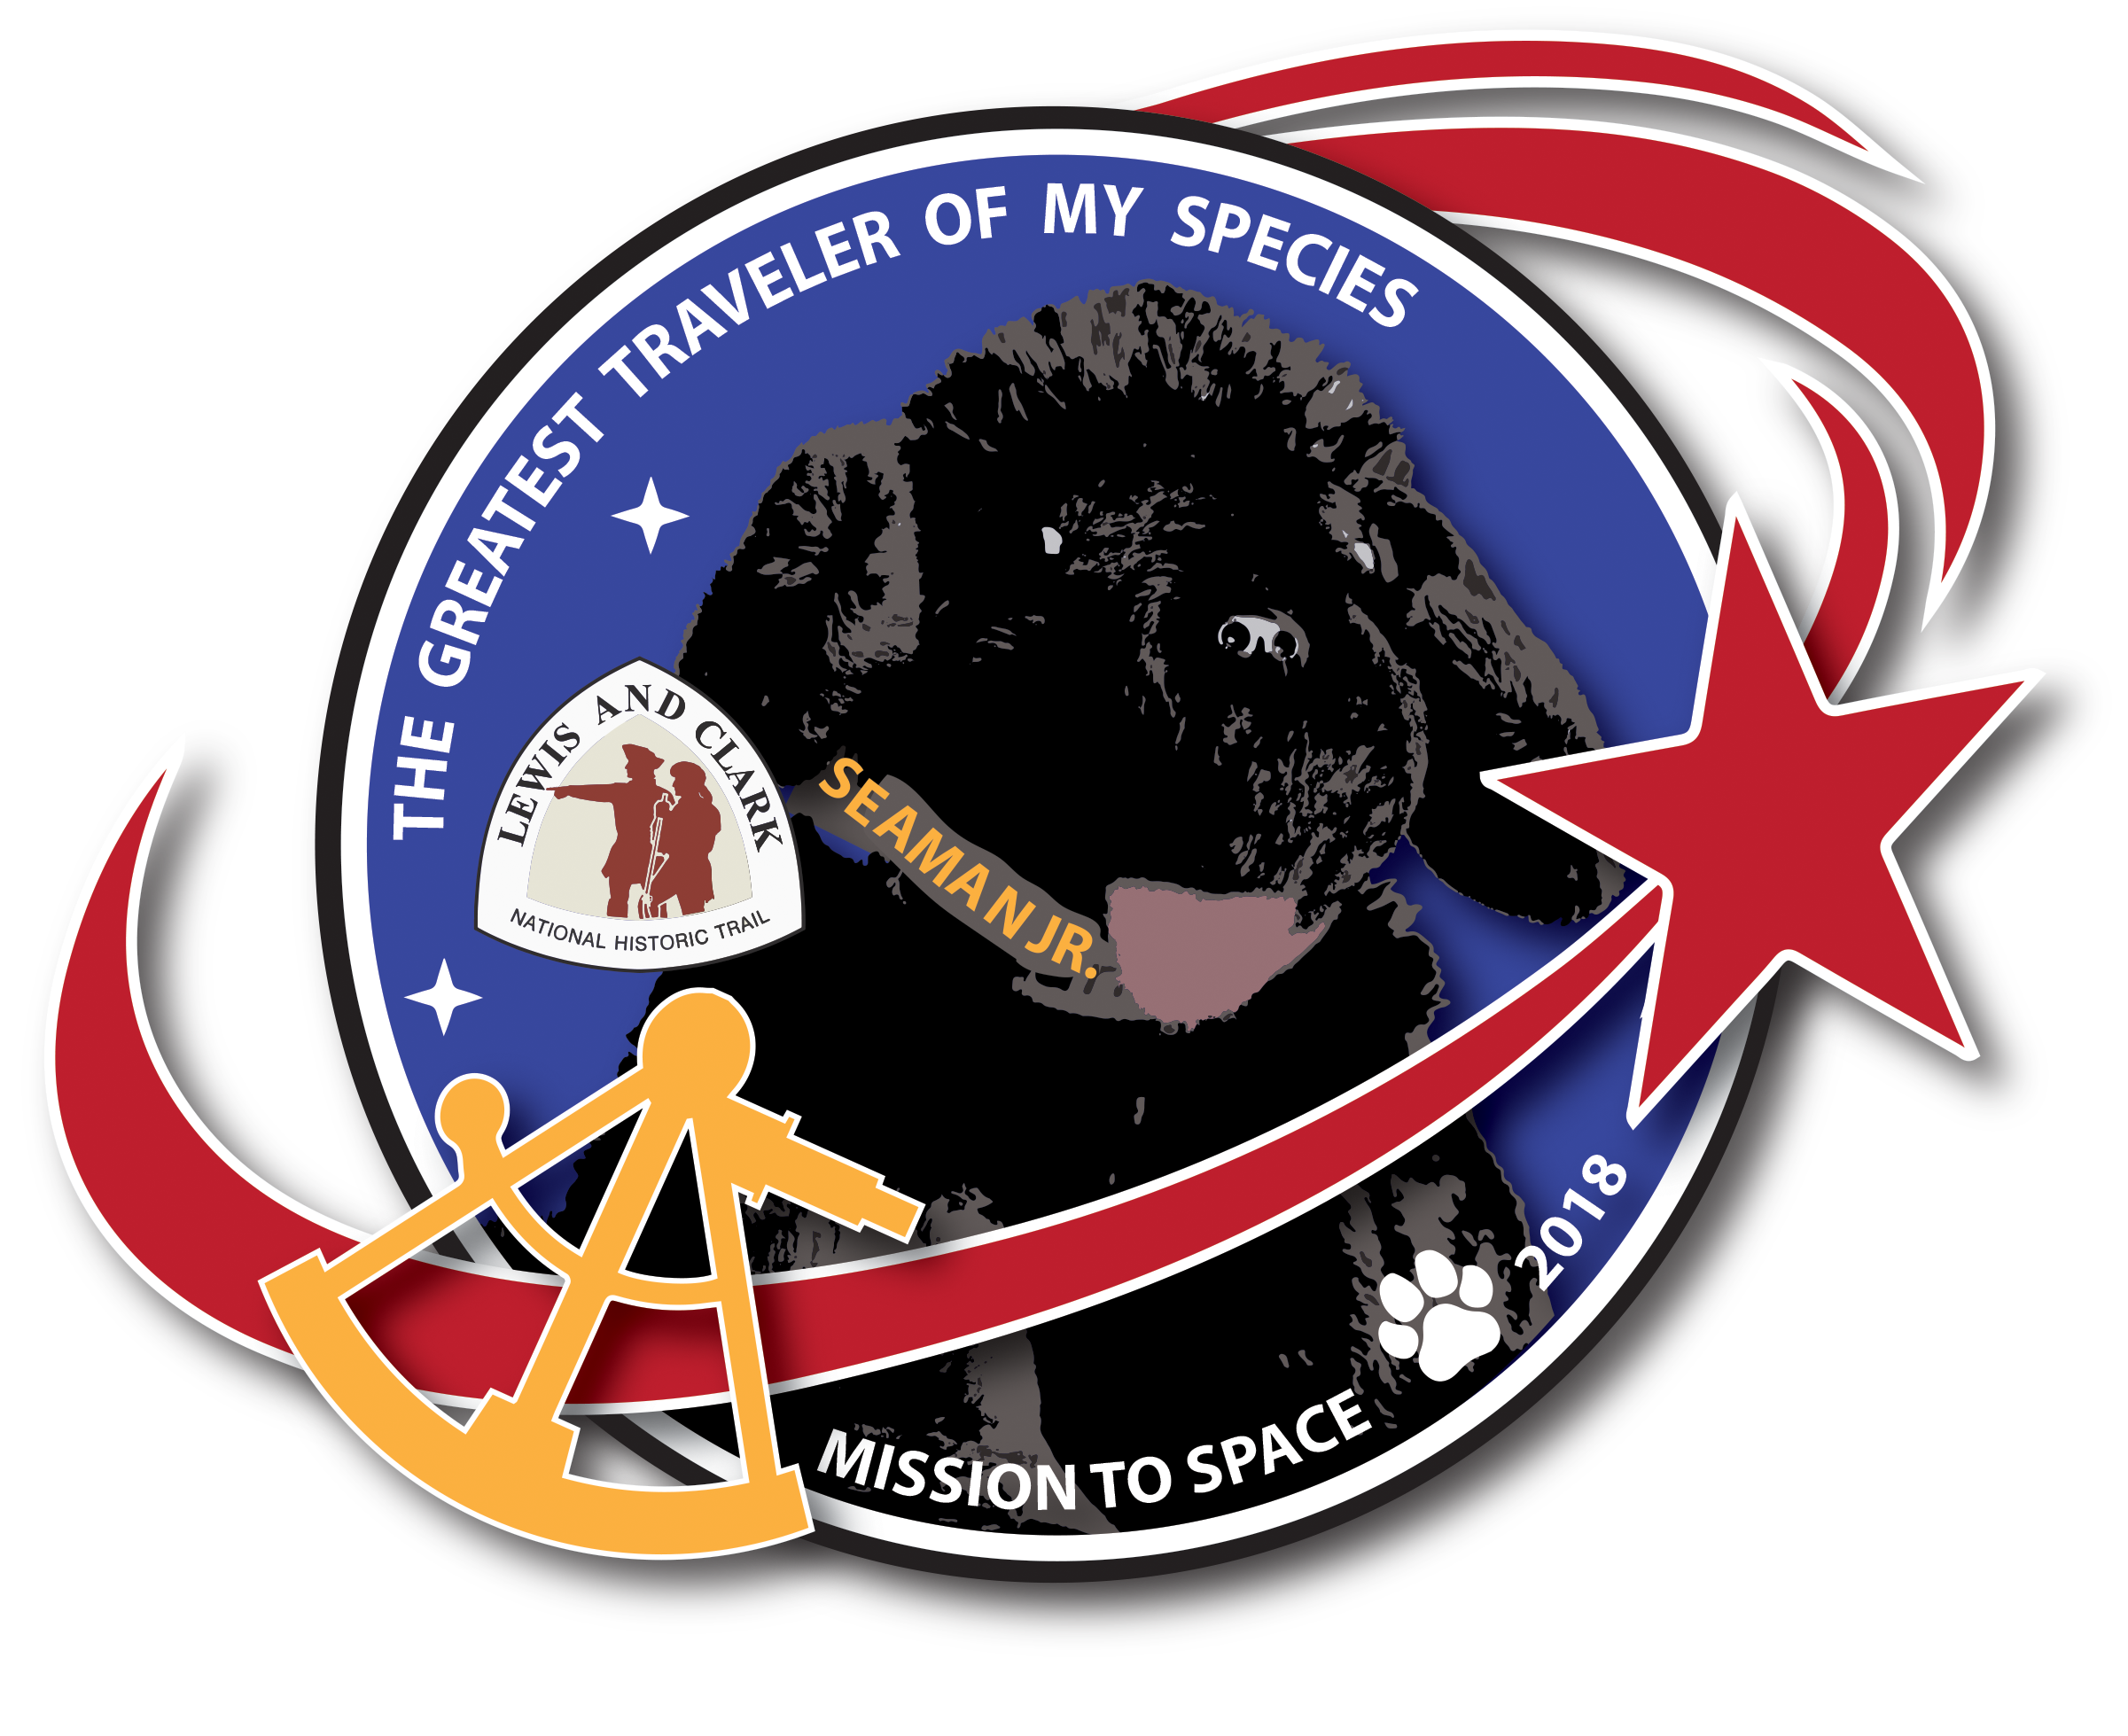 Patch for Seaman Jr space mission